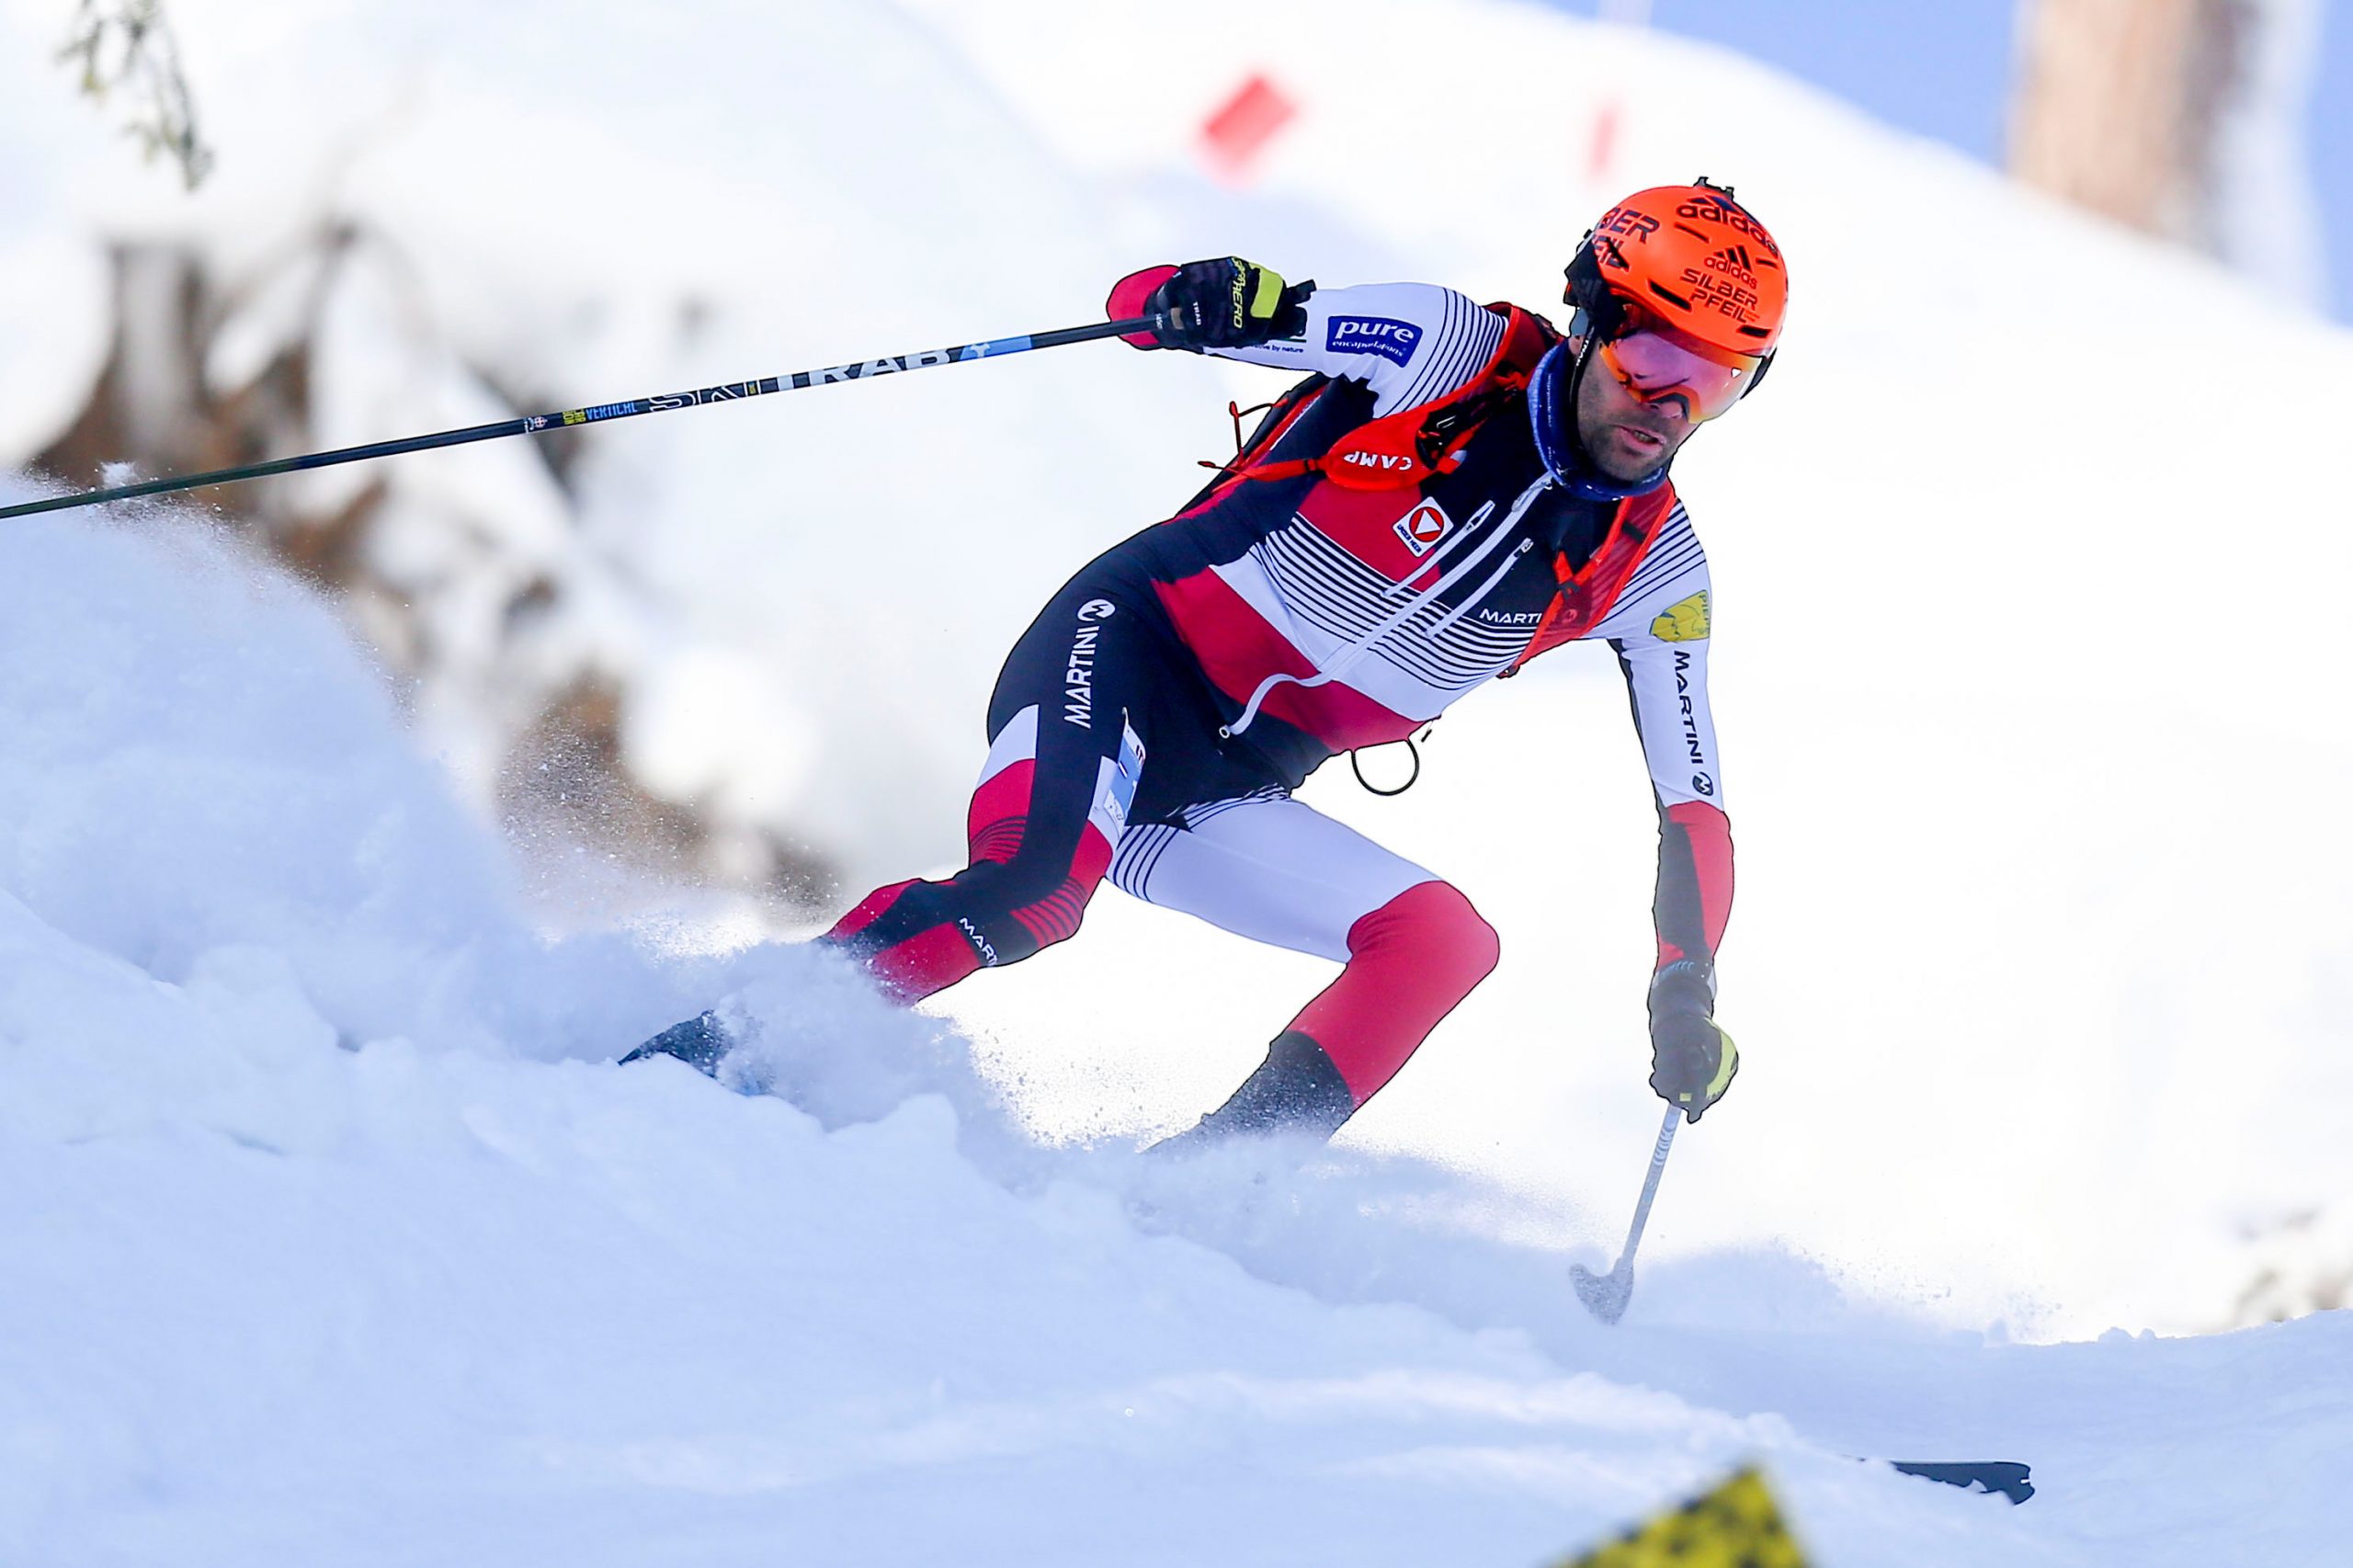 BISCHOFSHOFEN, AUSTRIA - JANUARY 20: Jakob Herrmann of Austria during ISMF World Cup Individual Race on January 20, 2019 in Bischofshofen, Austria.